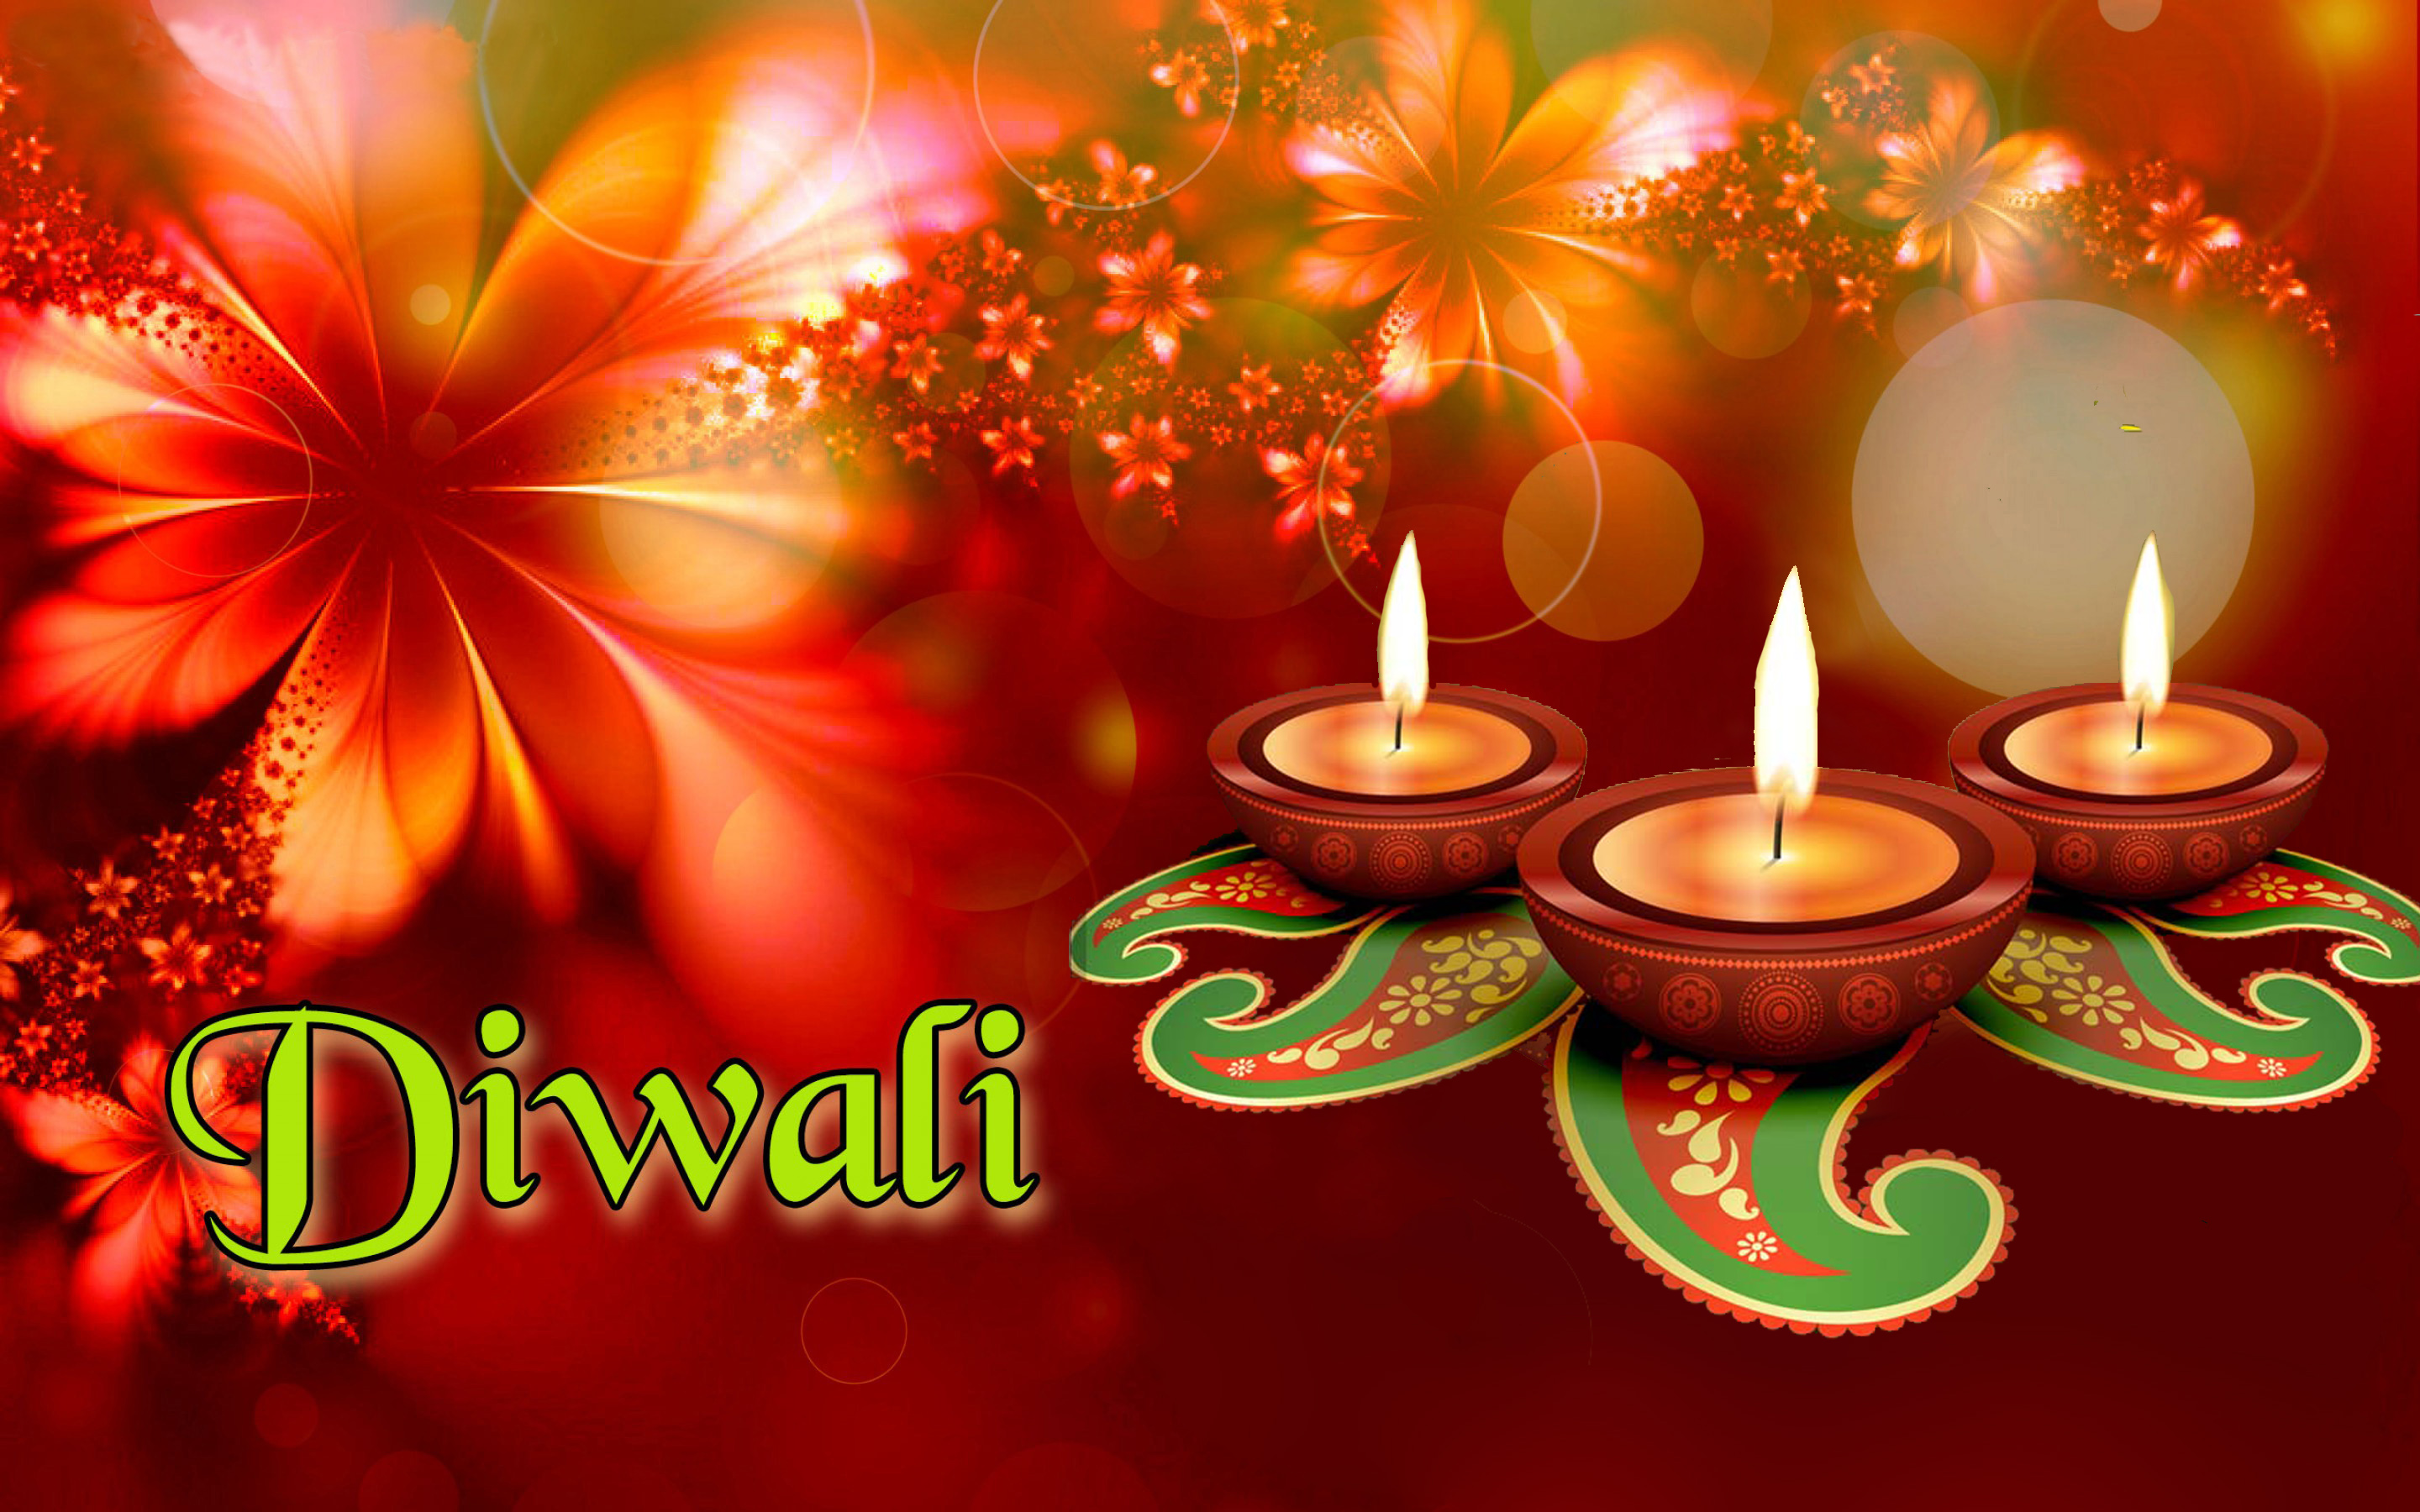 Greetings And Good Wishes Of Diwali Hd Desktop Backgrounds Free